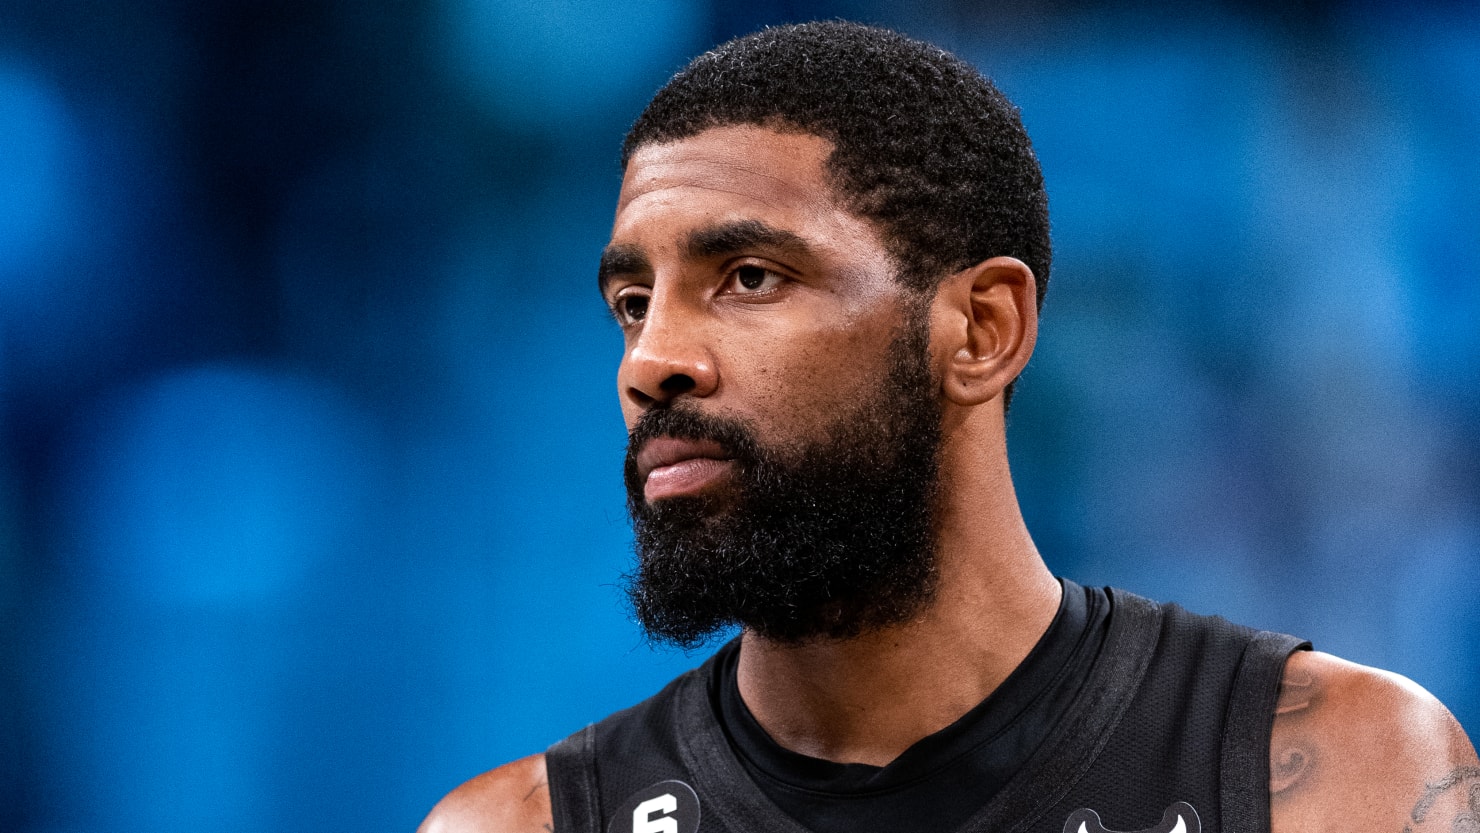 Nike Cuts Ties With Kyrie Irving Over ‘Hate Speech’